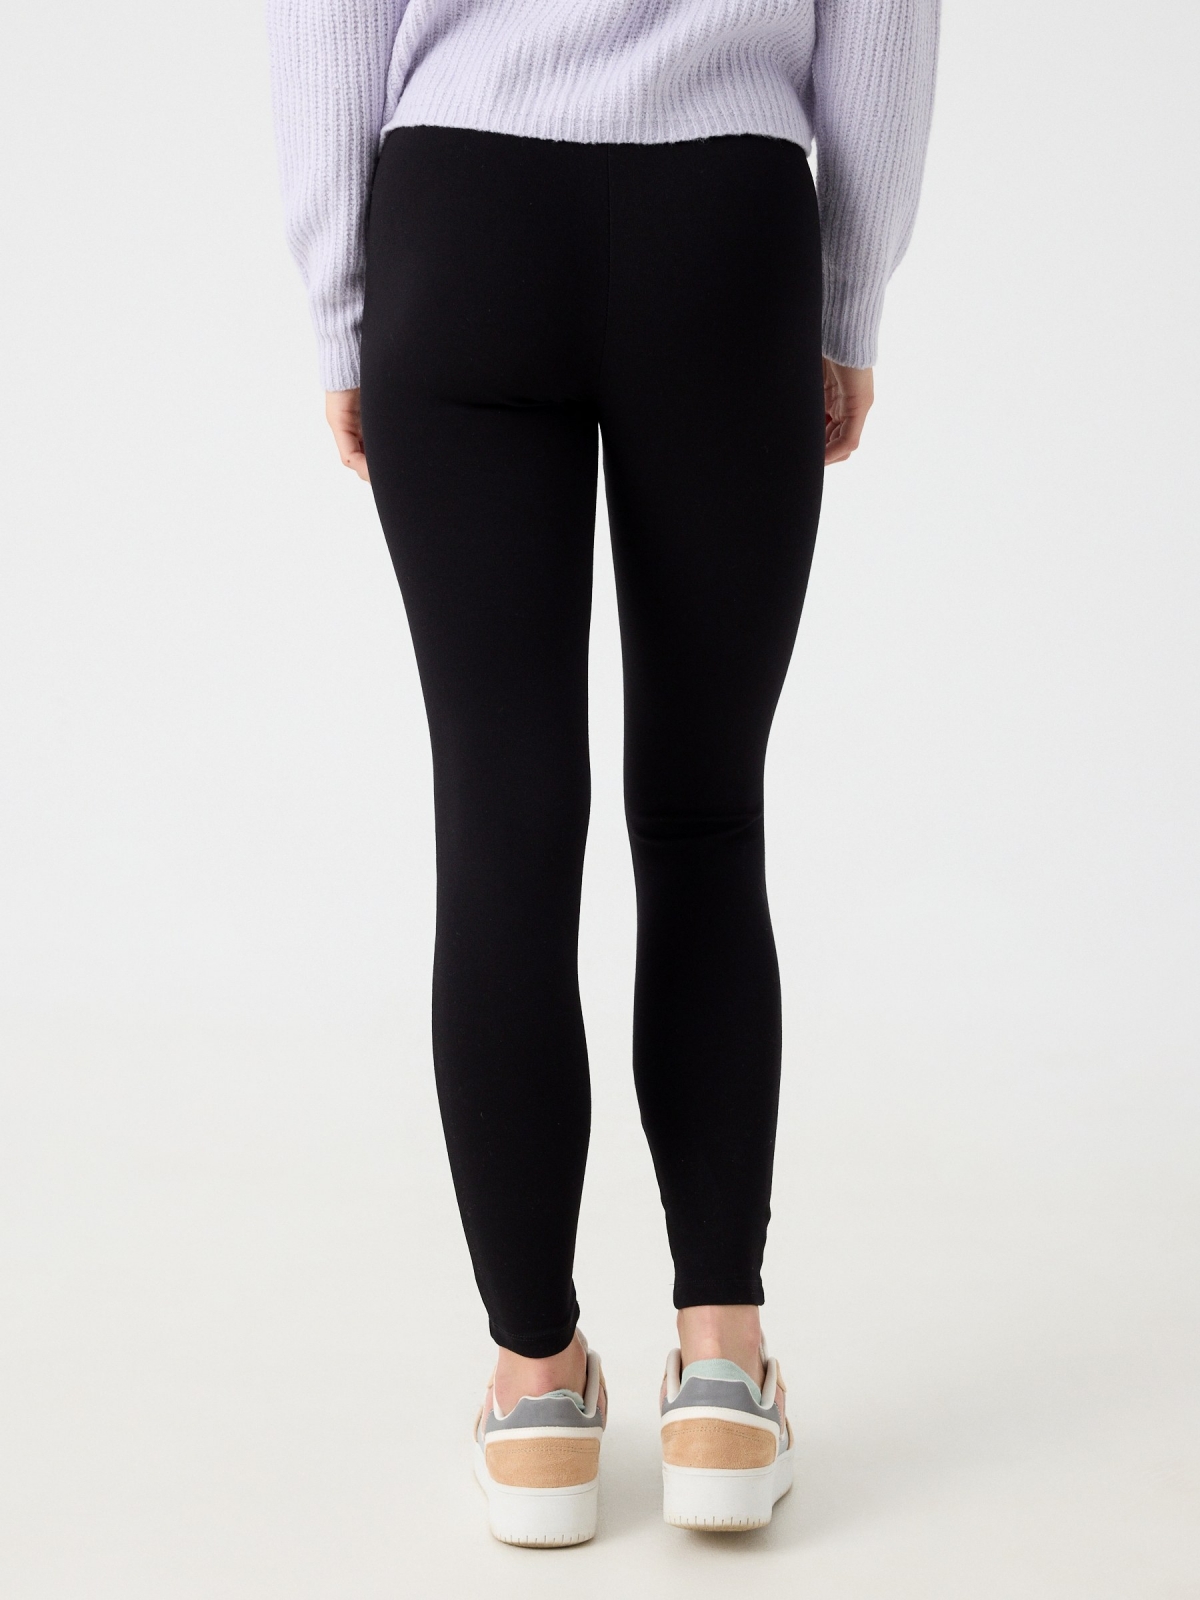 High-waisted zip-up leggings black middle back view